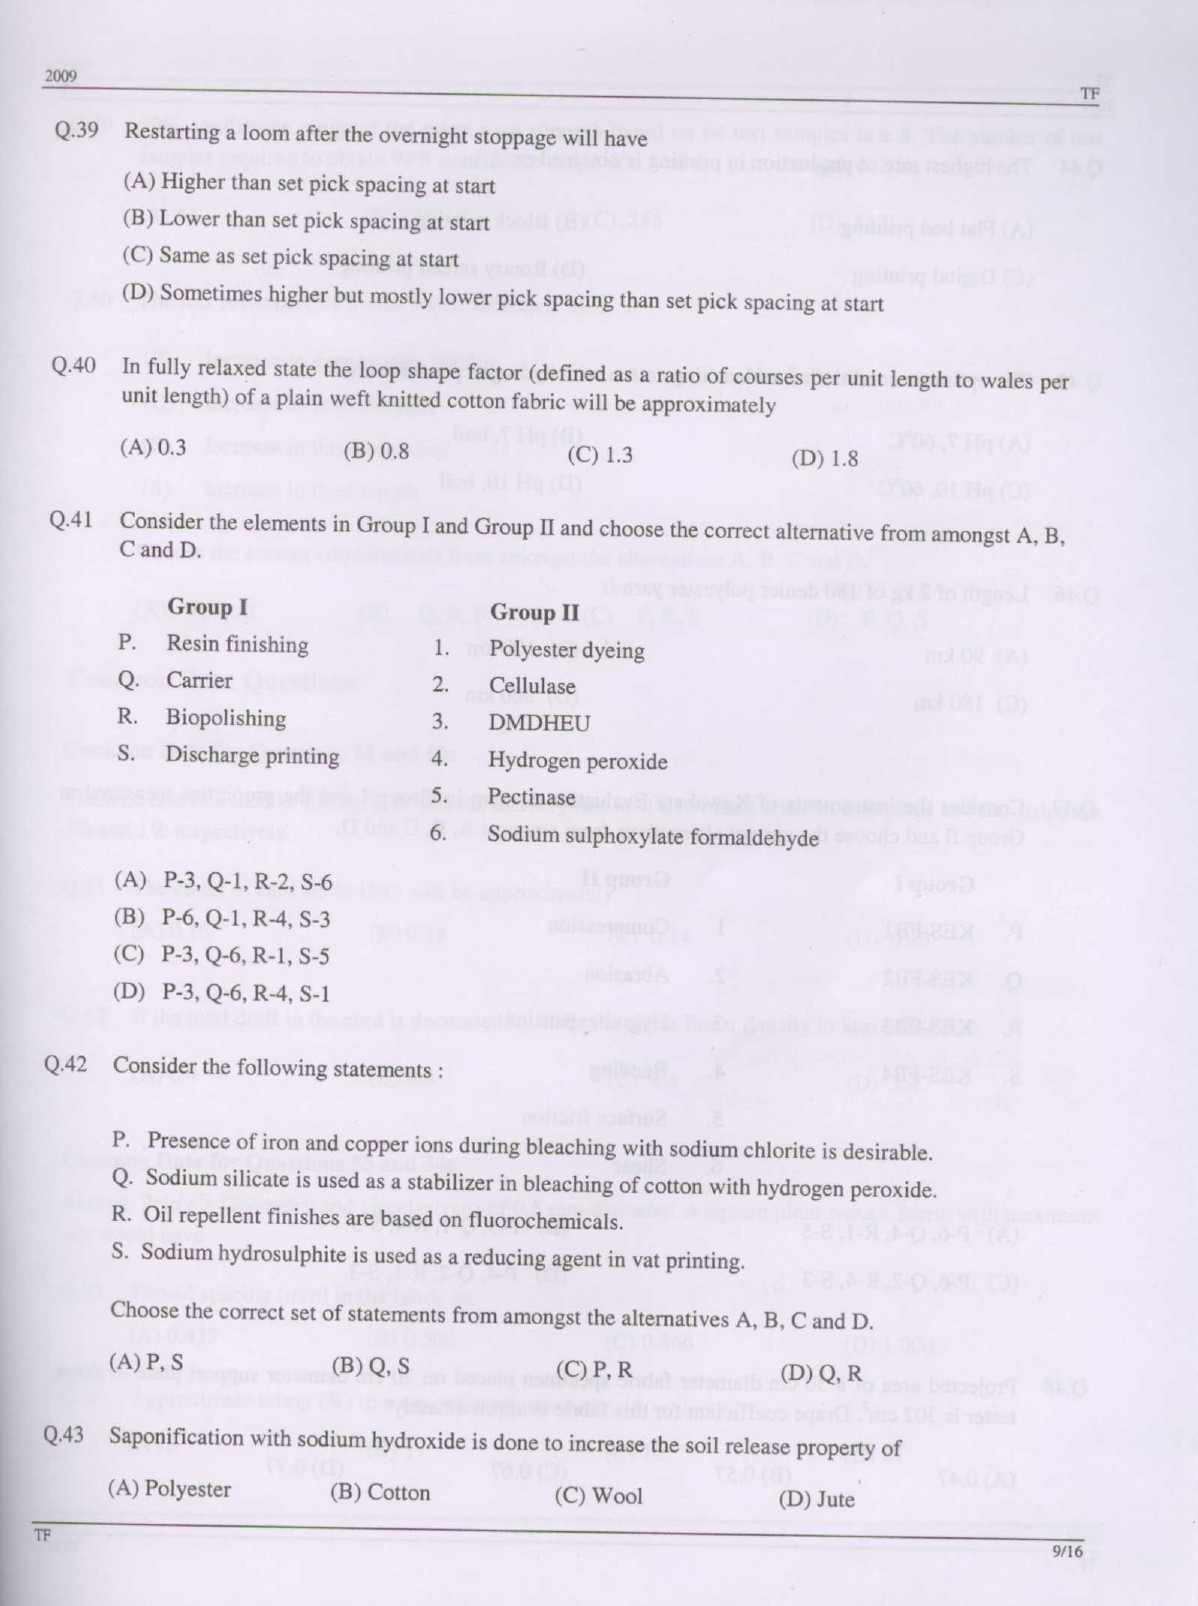 GATE Exam Question Paper 2009 Textile Engineering and Fibre Science 9